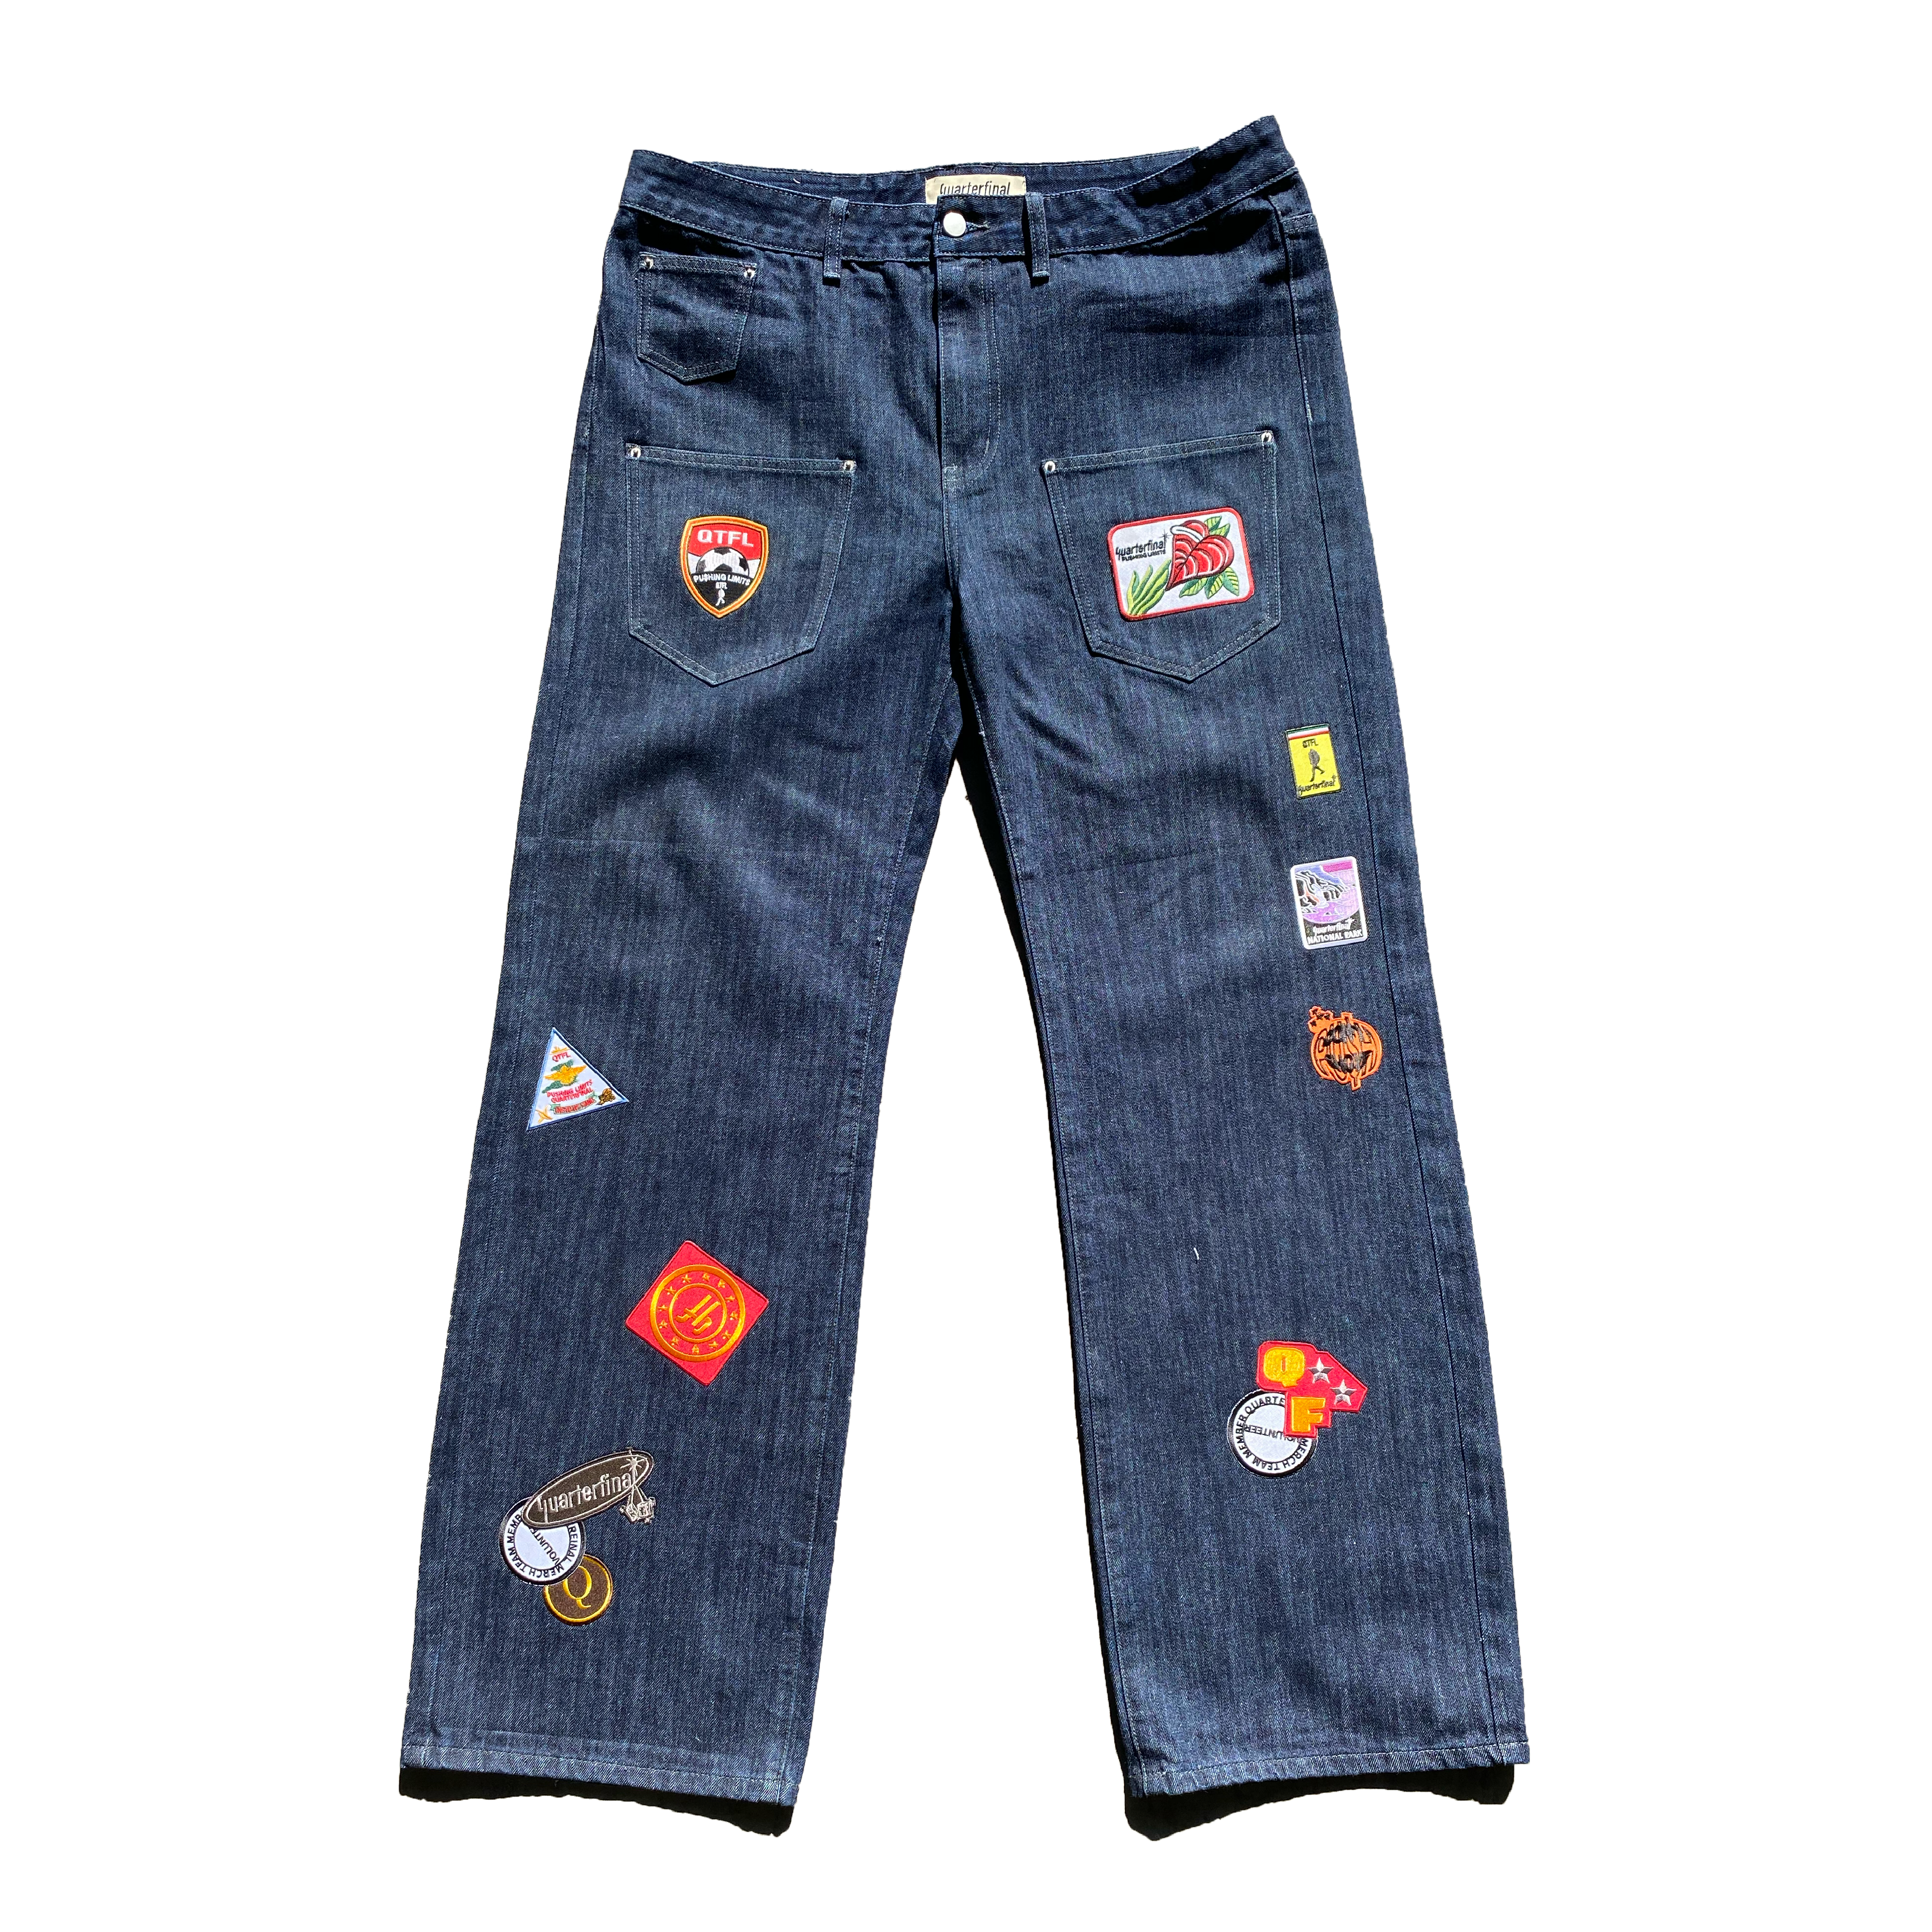 Patches Inside Jeans